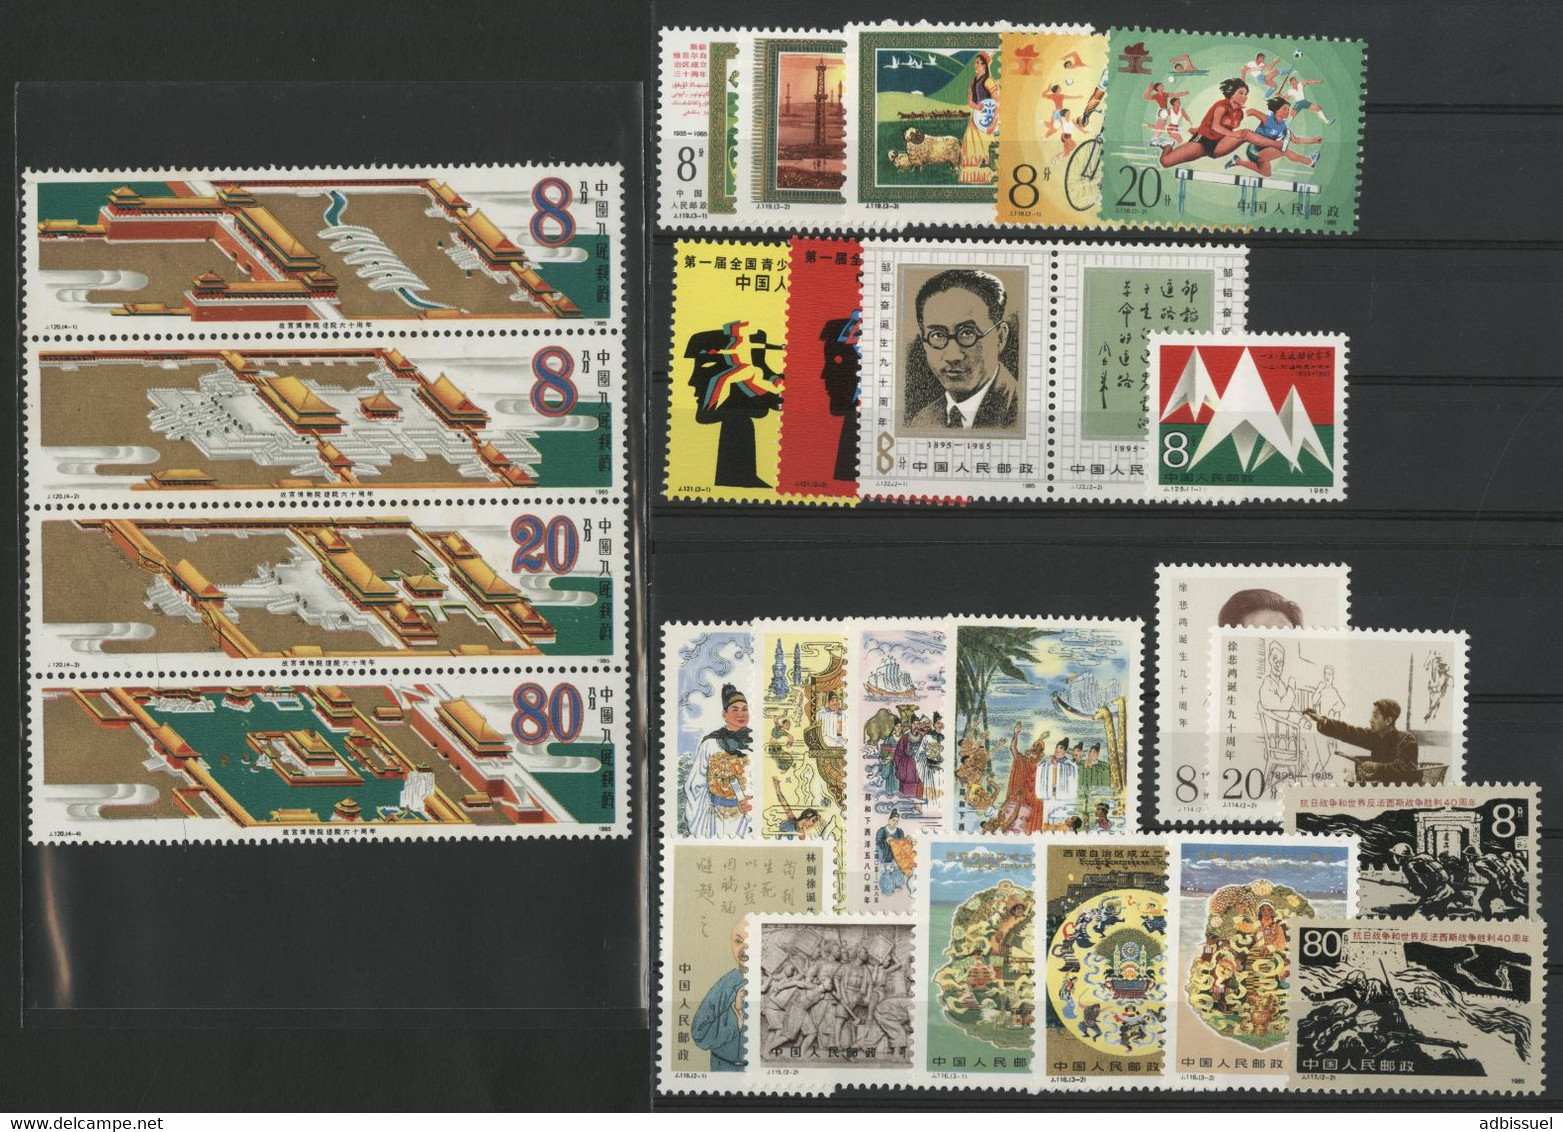 CHINA / CHINE 1985 Value 21 €. 28 Commemoratives Stamps MNH ** N° 2732 To 2758. VG/TB. - Unused Stamps